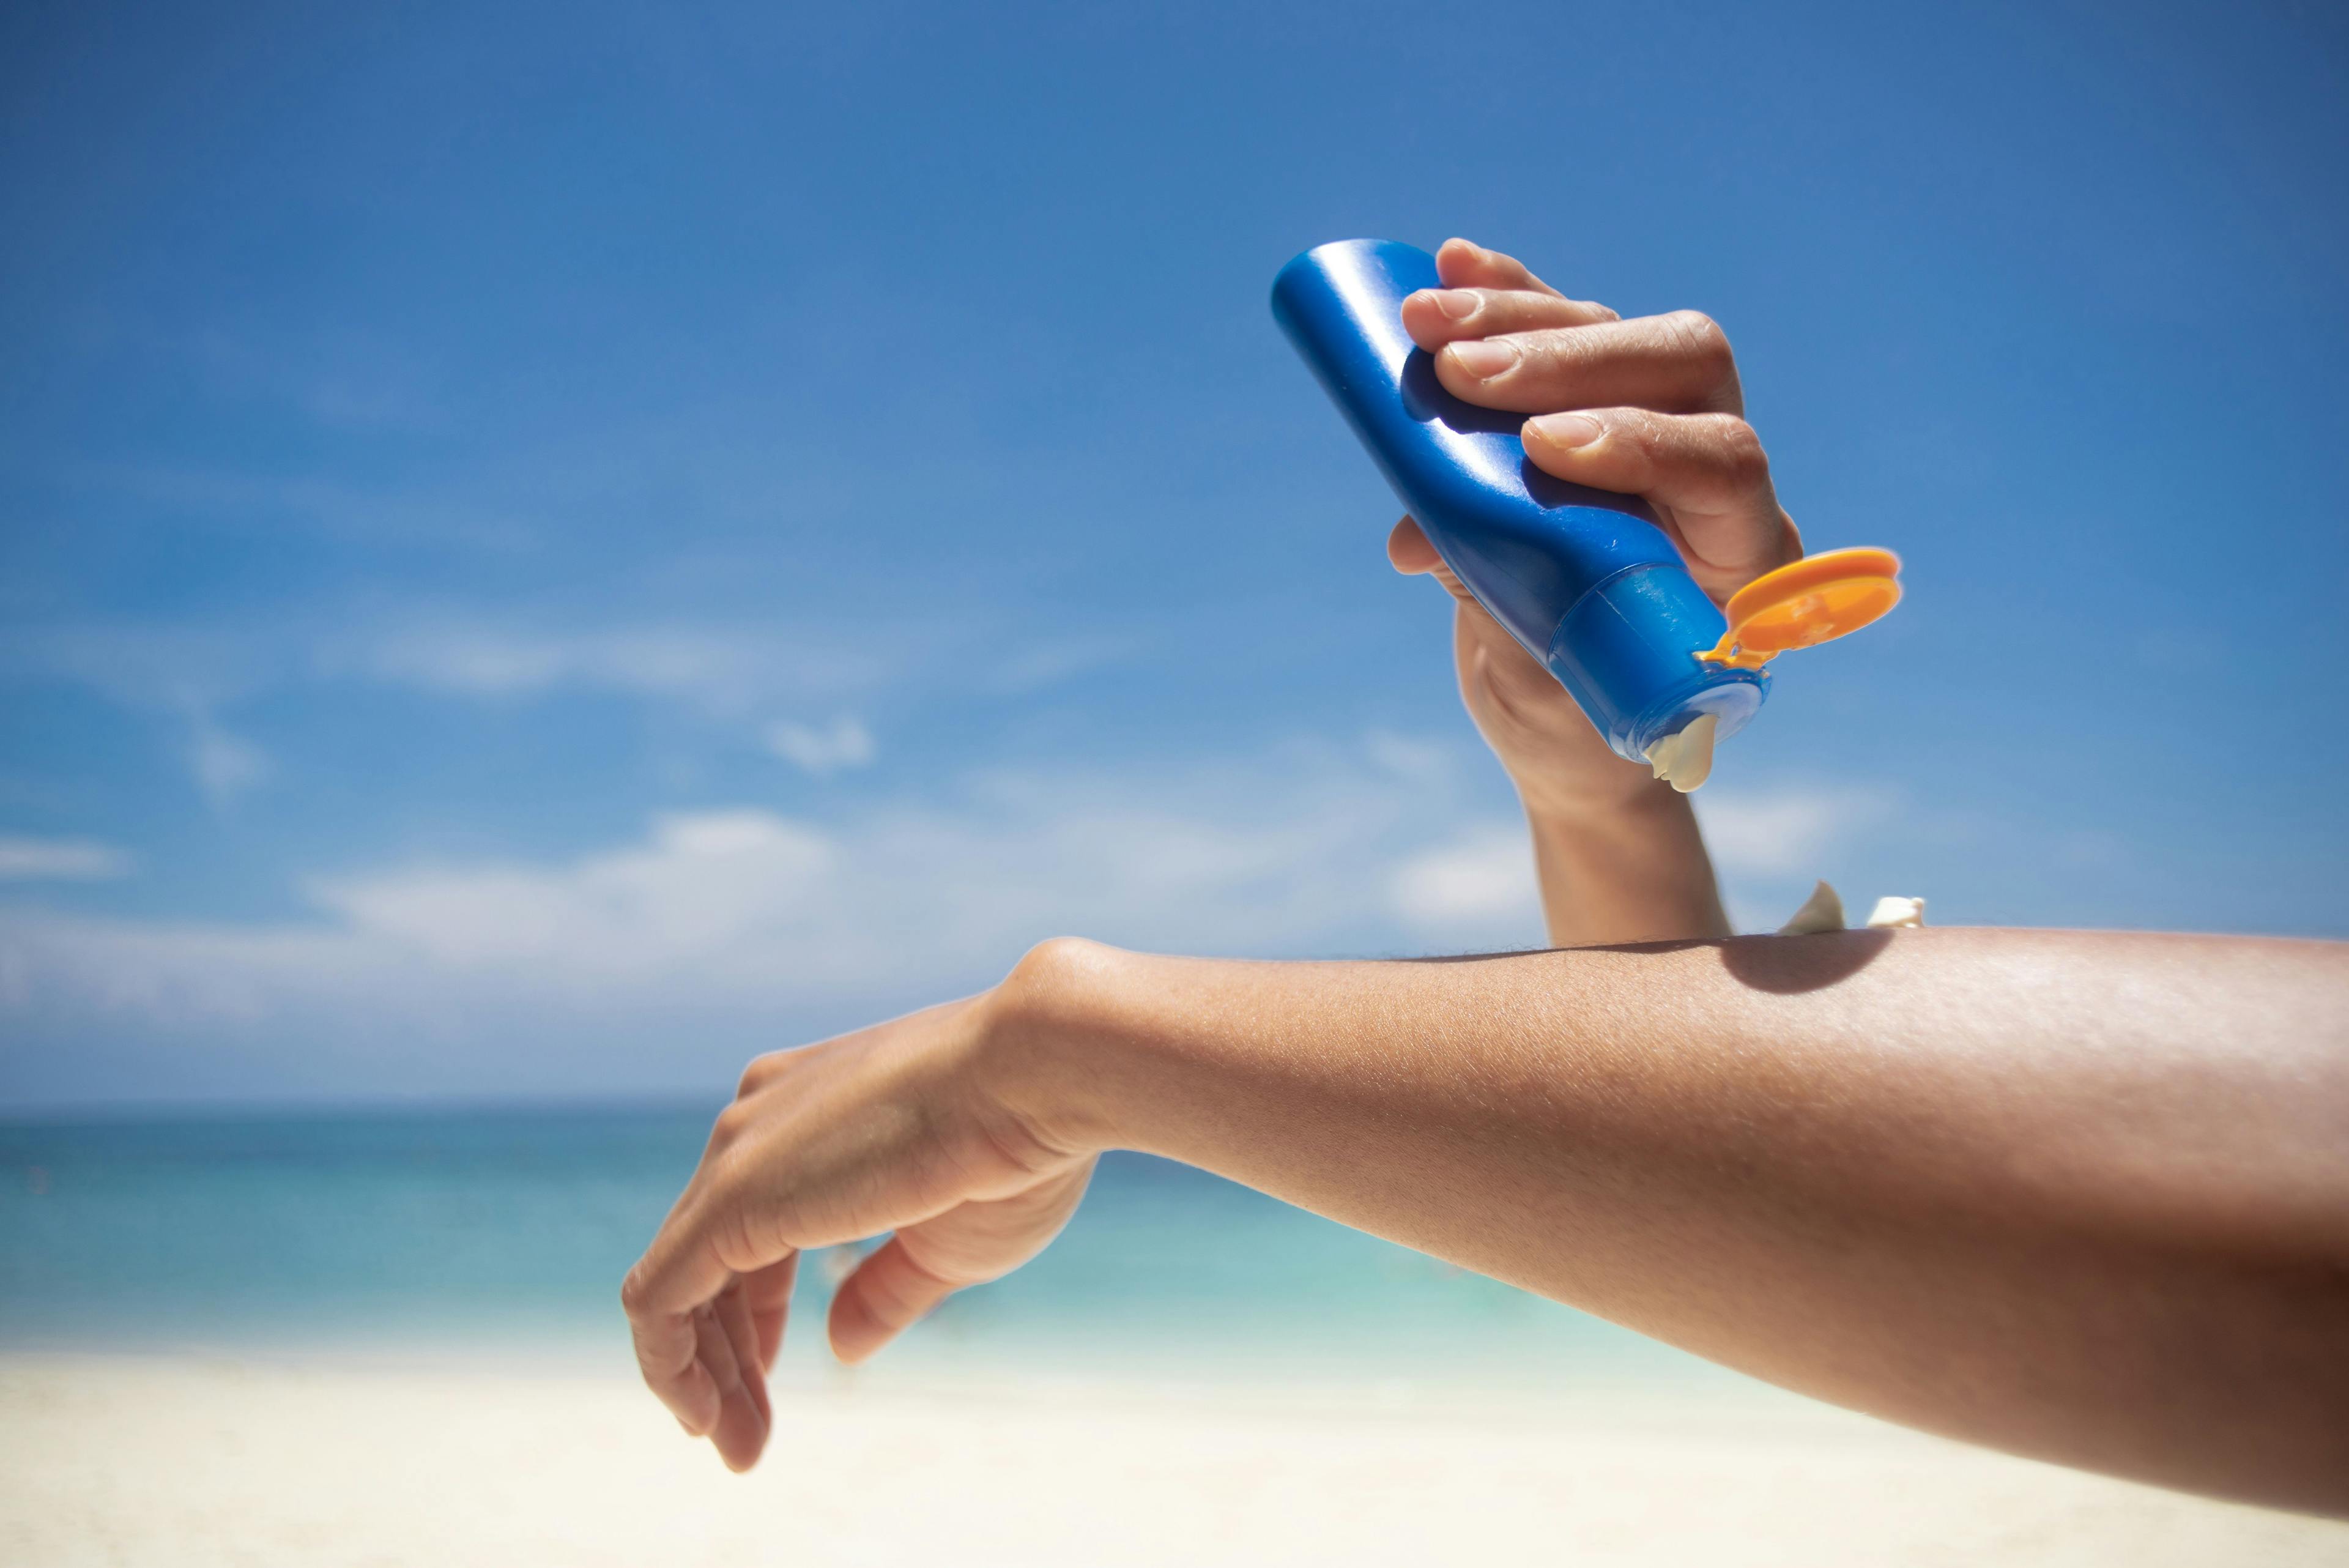 woman applying sunscreen to her arm on the beach | Image Credit: lesterman - stock.adobe.com